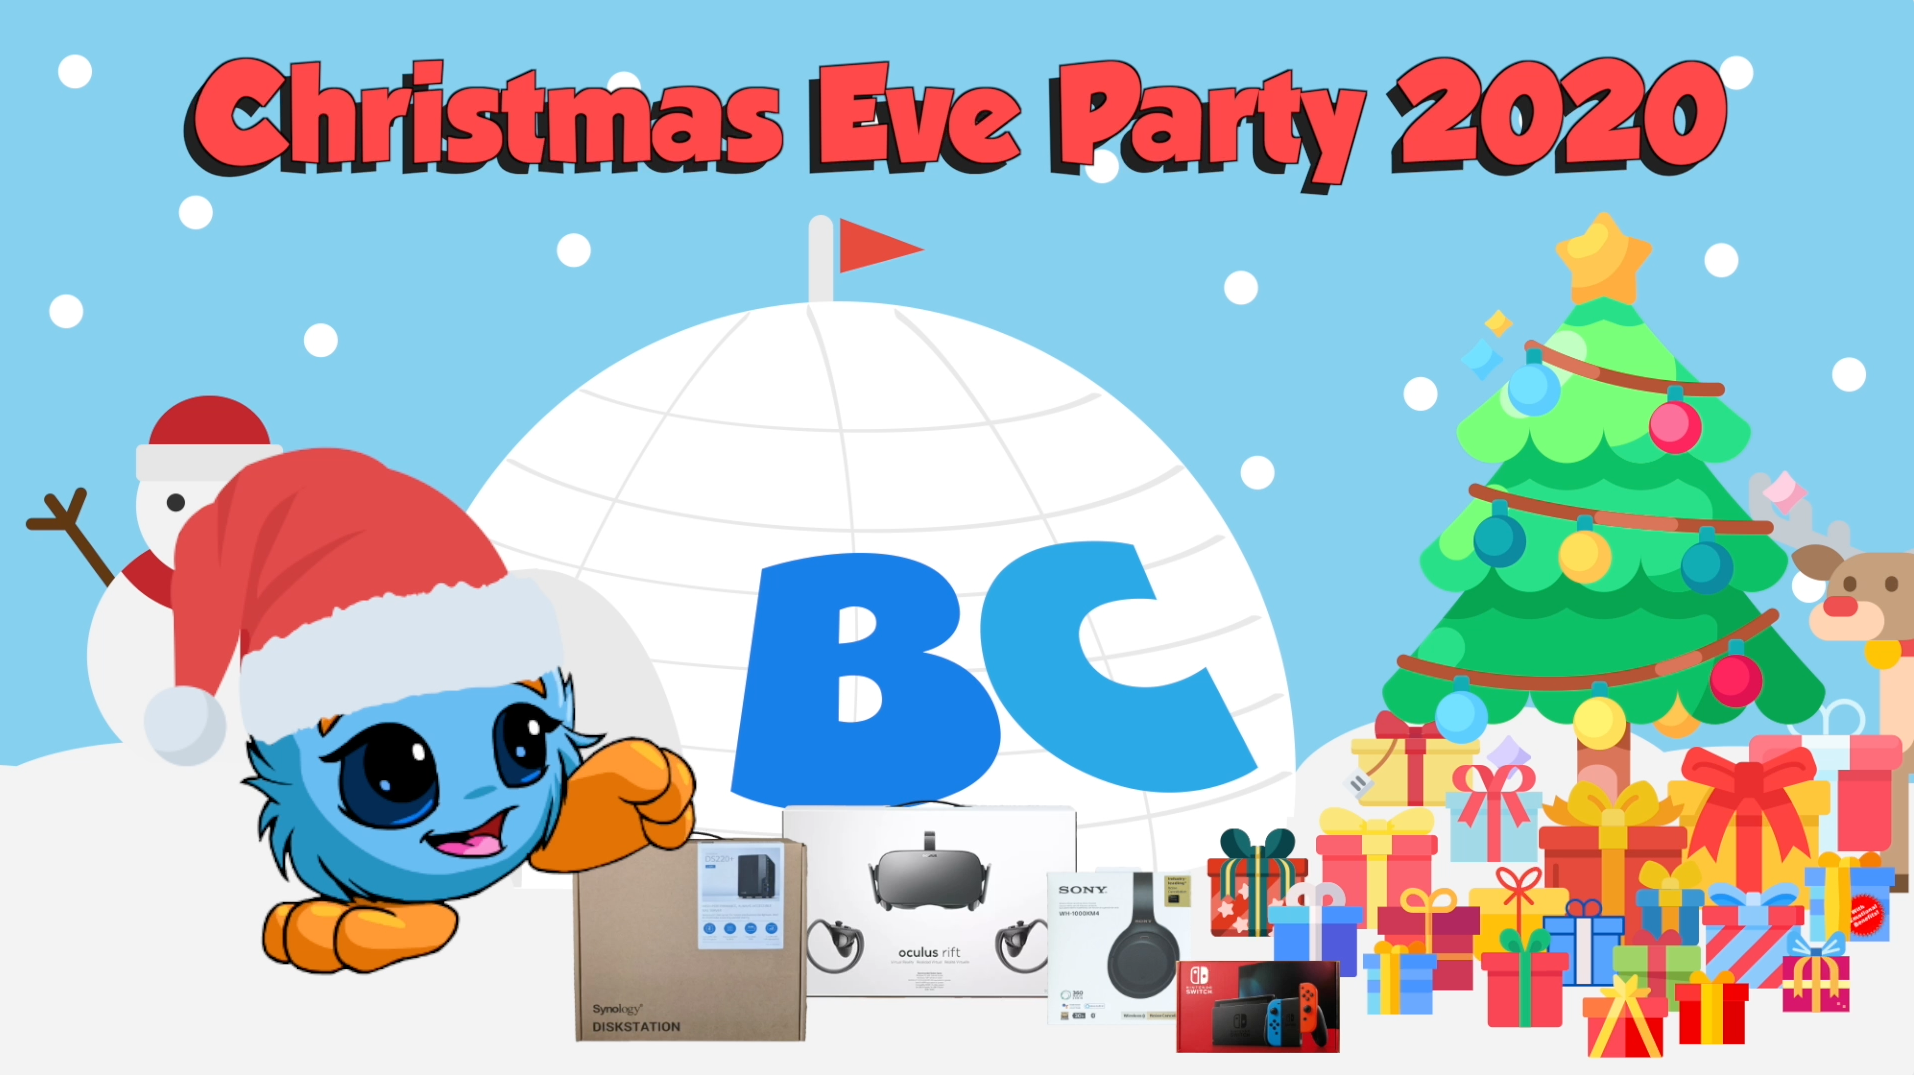 BetaChat Christmas Eve Party 2020